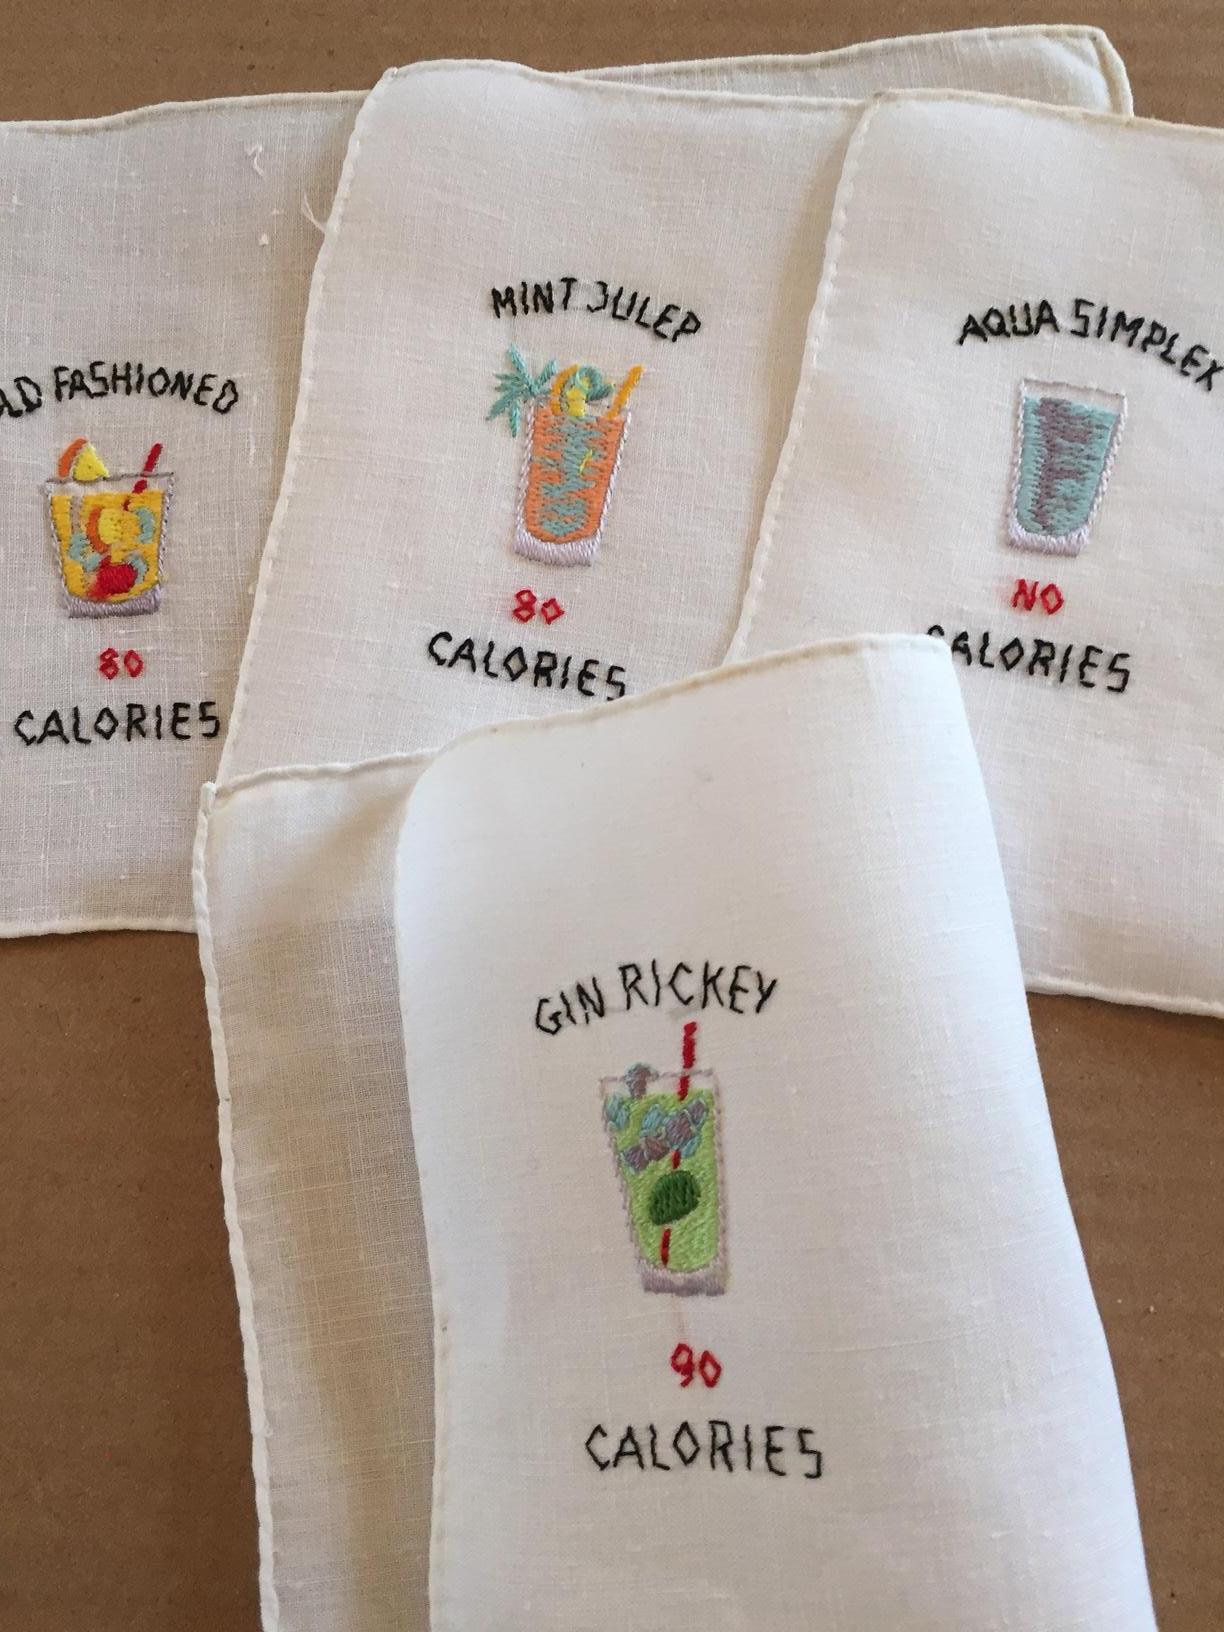 This set of eight cocktail napkins has the name and image of a different drink on each one, along with the calorie count. They are white linen with colorful embroidery. The set is in excellent condition.
Measurements;
Height 5.5